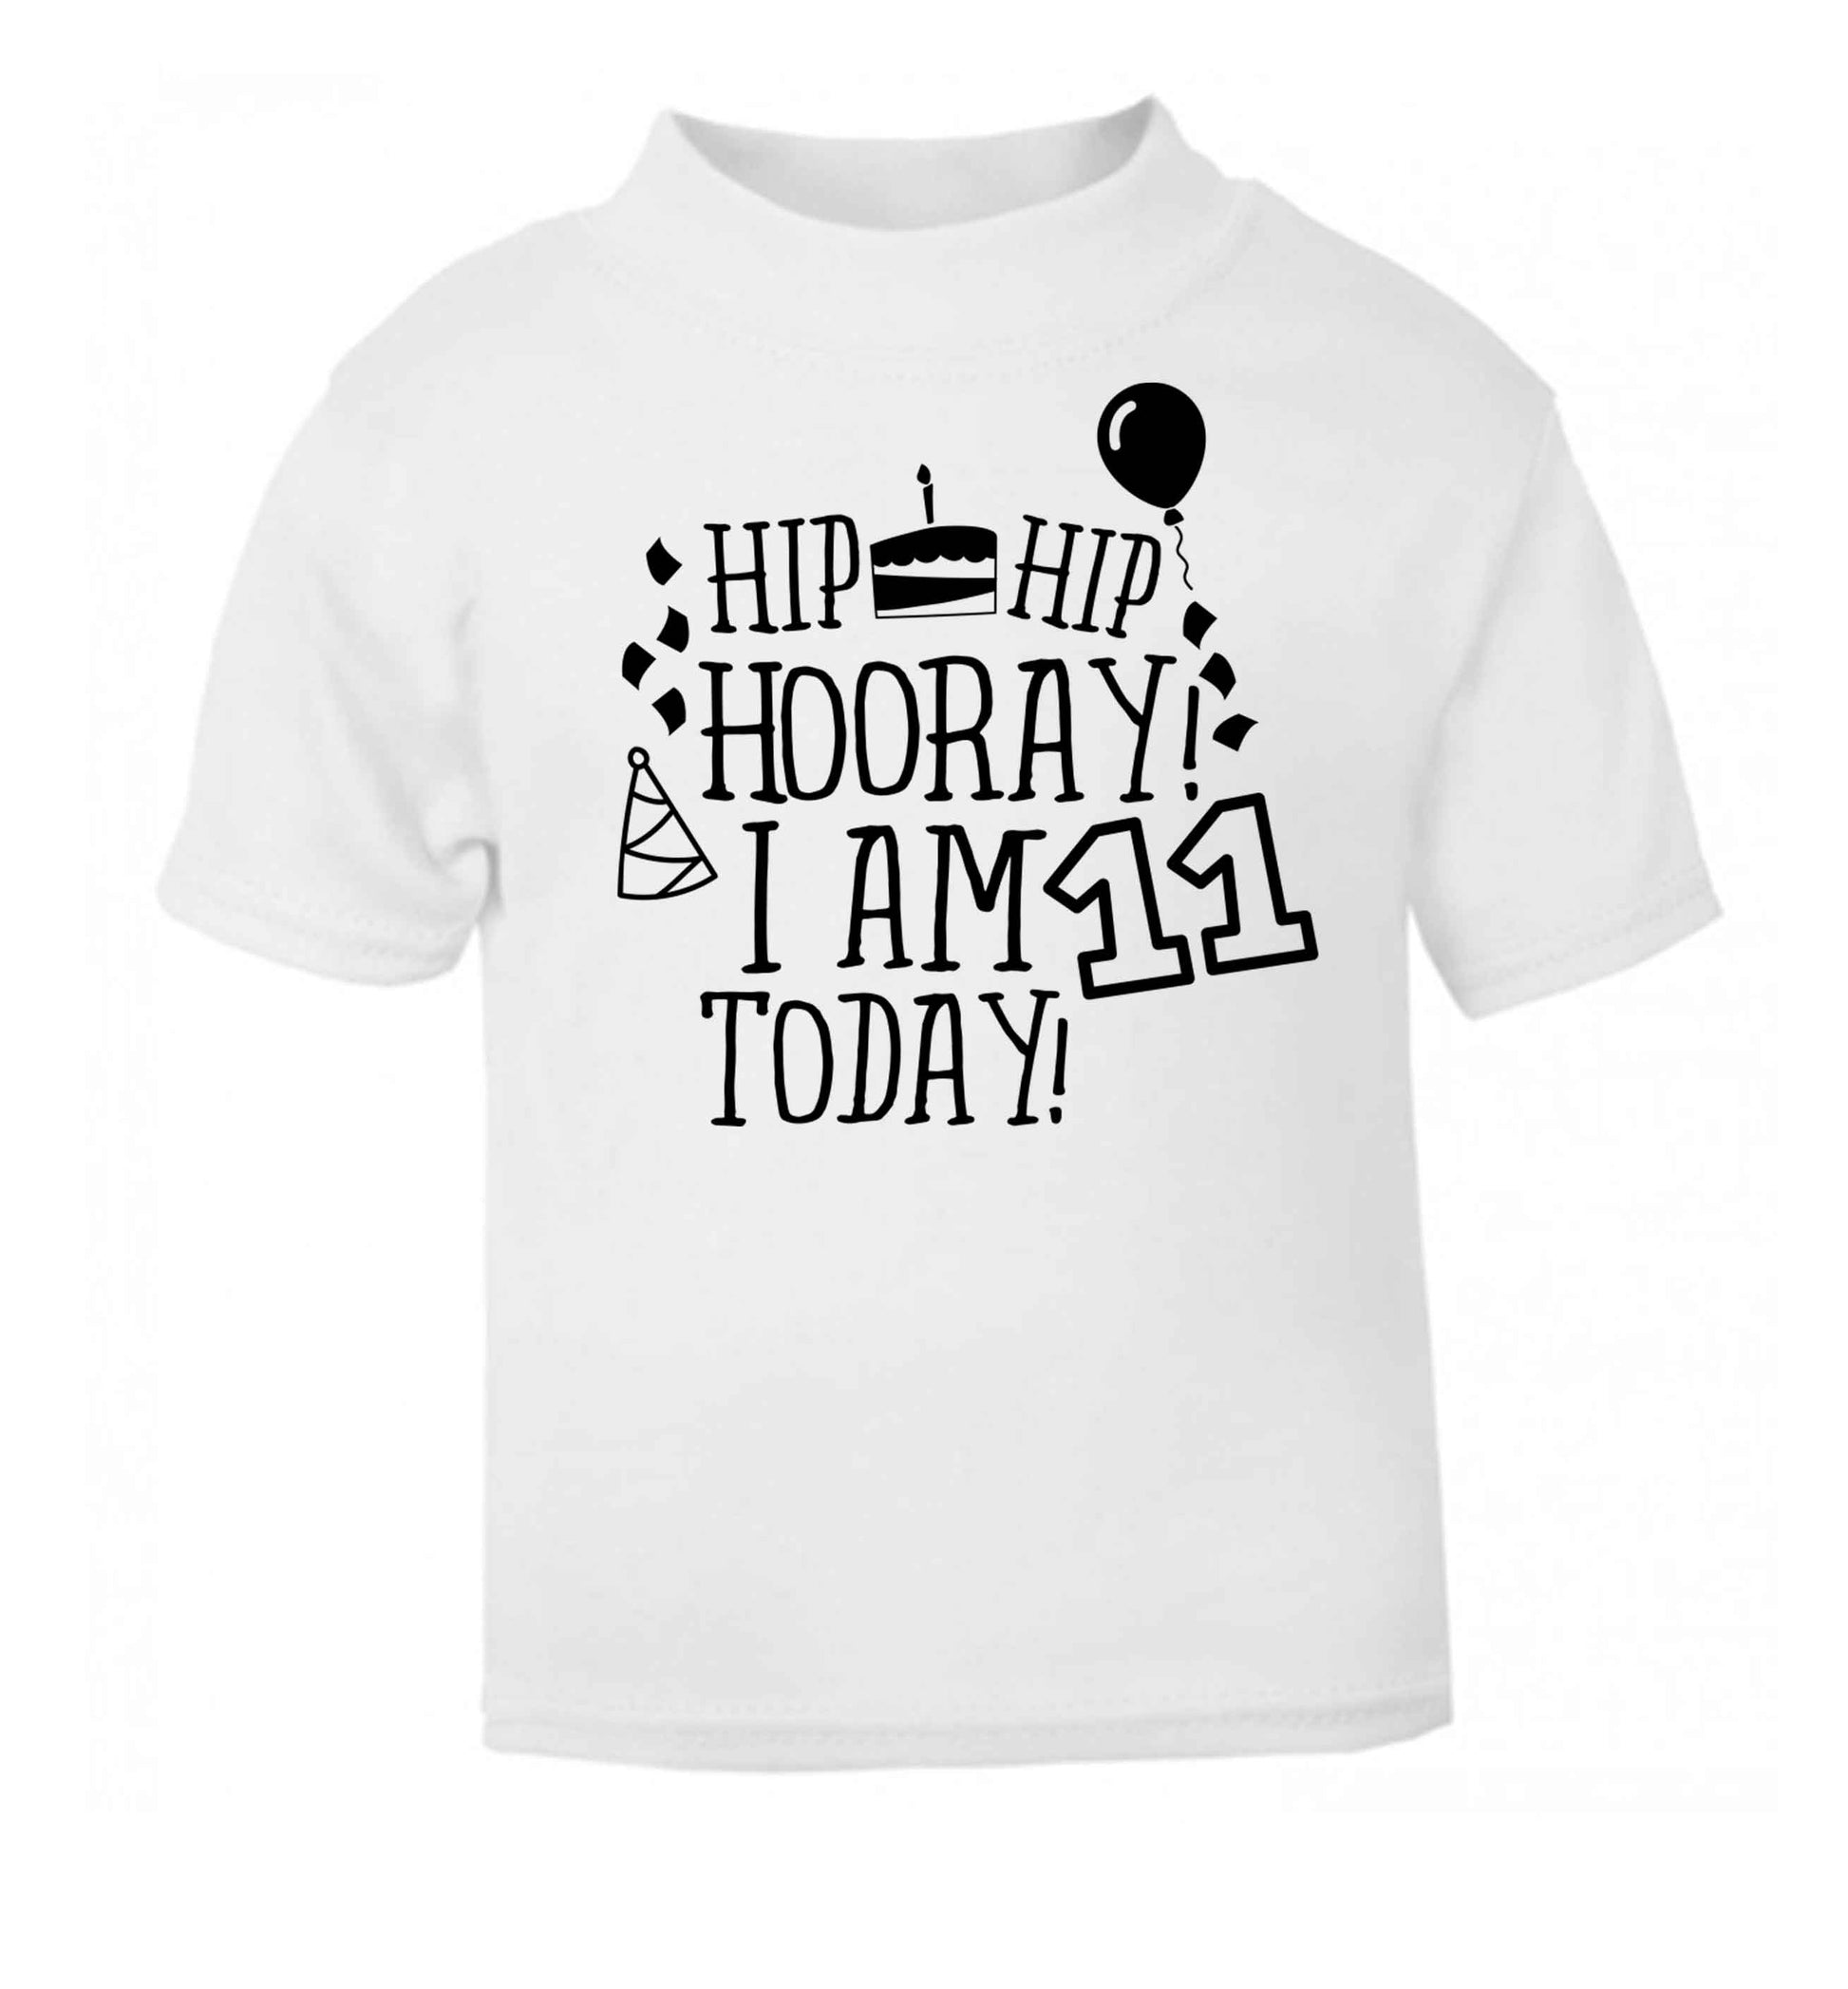 Hip hip hooray I am eleven today! white baby toddler Tshirt 2 Years